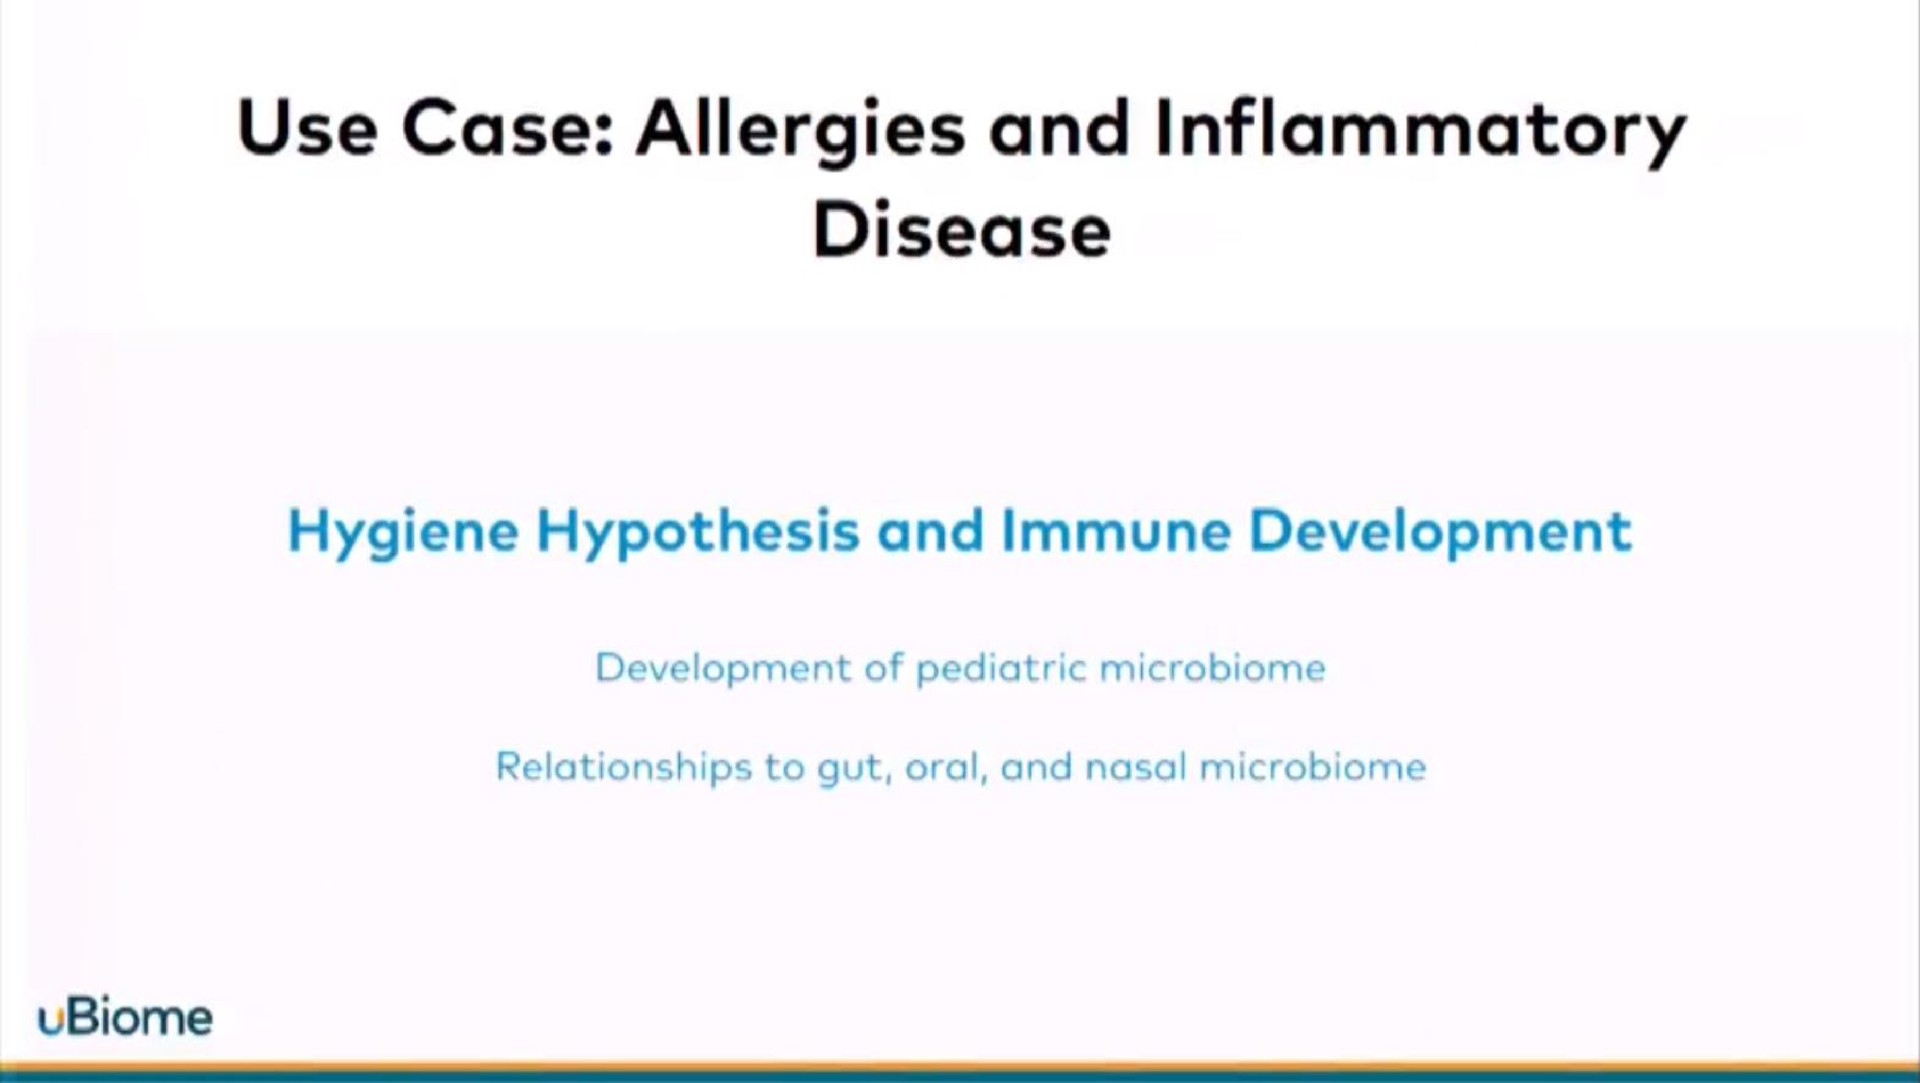 use case allergies and inflammatory disease | uBiome